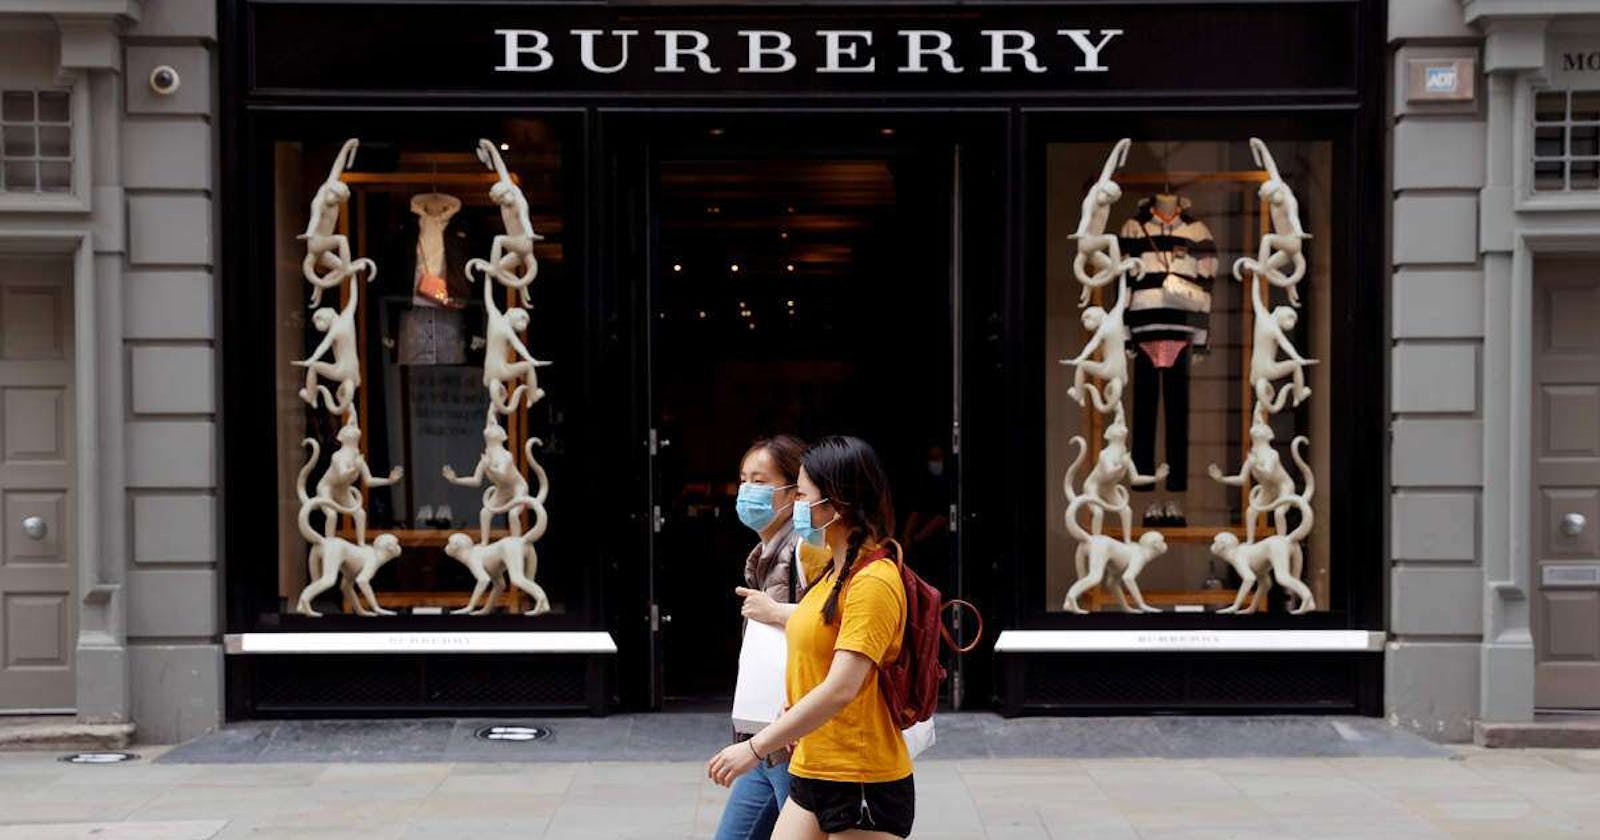 Burberry: British elegance and tradition in fashion